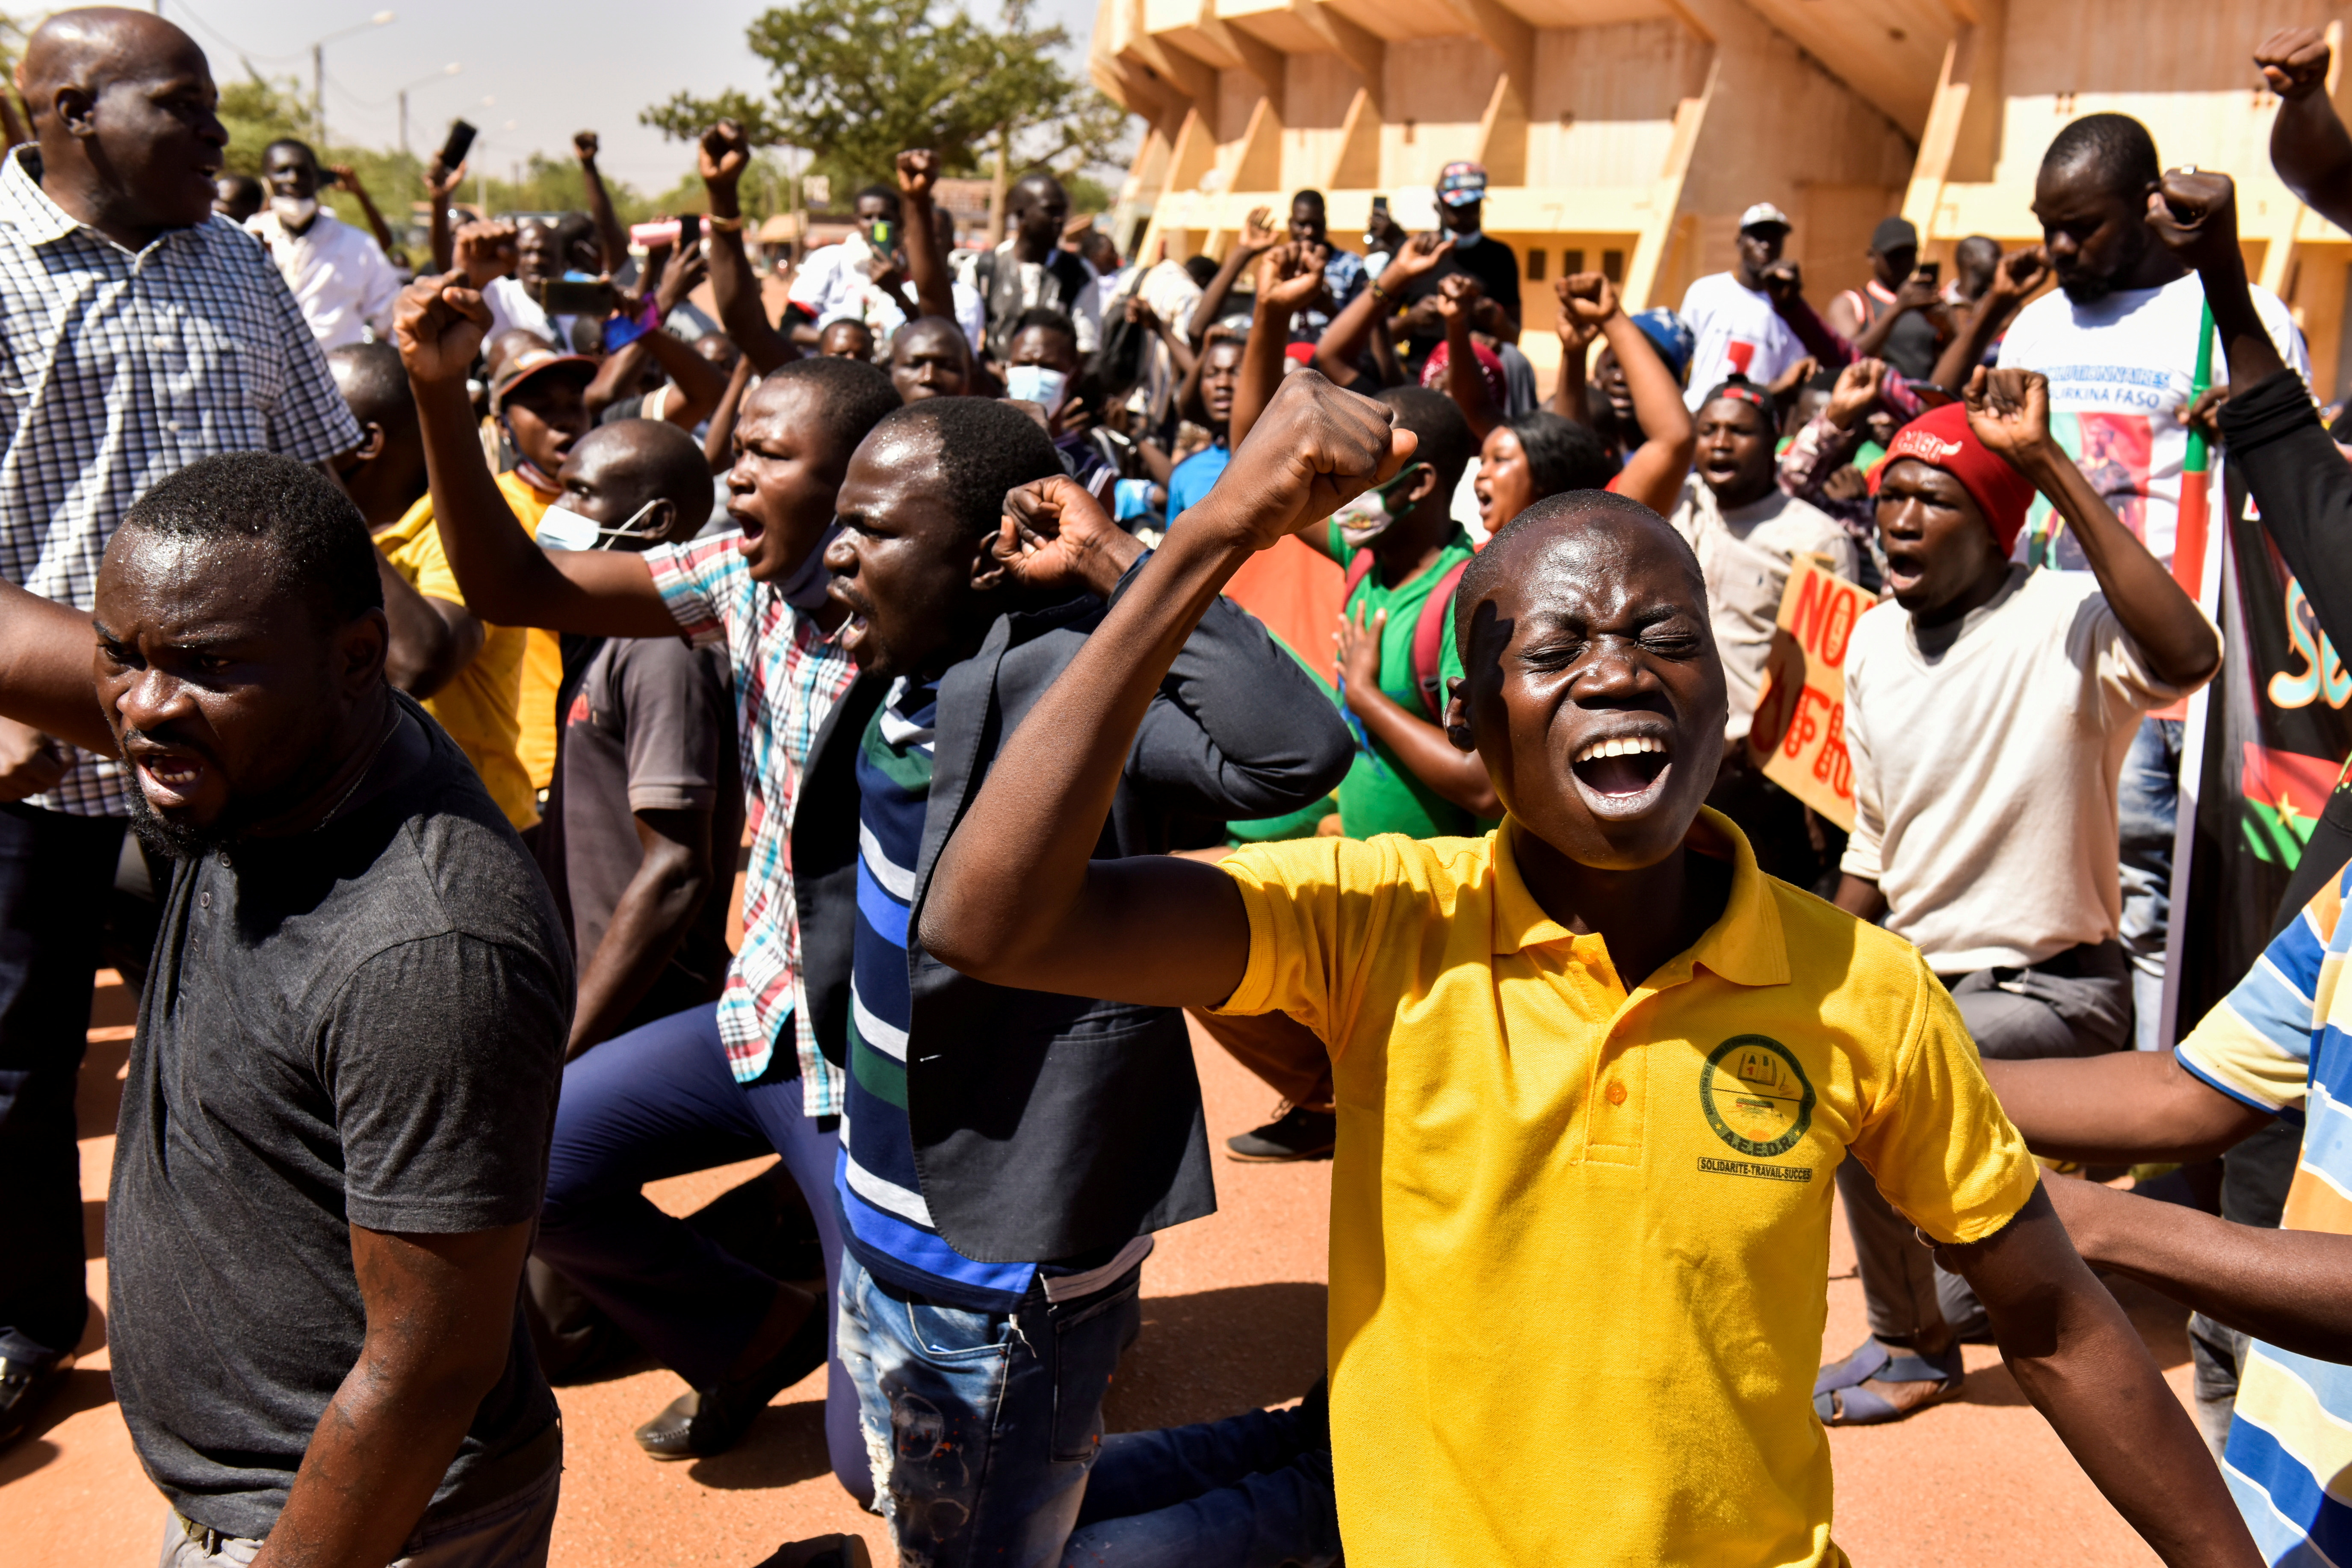 Civil society hold a protest following an attack on a gendarmerie post that killed 32 people, in Ouagadougou